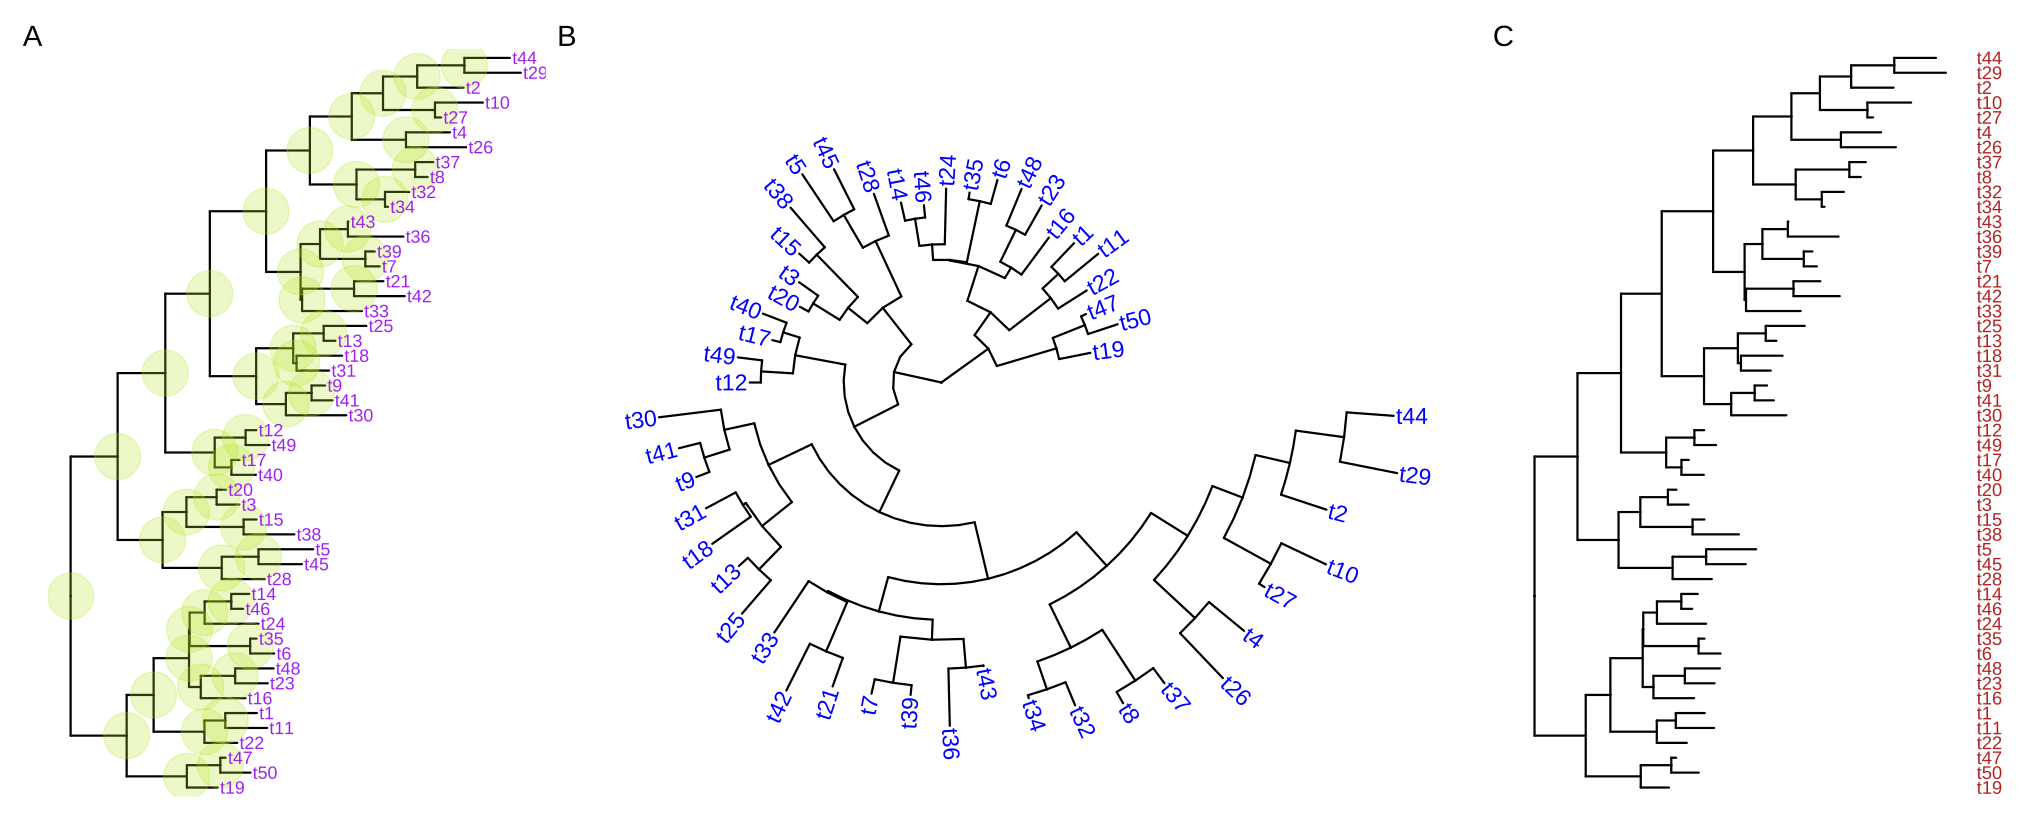 Display tip labels. geom_tiplab() supports displaying tip labels (A). For the circular, fan, or unrooted tree layouts, the labels can be rotated to fit the angle of the branches (B). For dendrogram/rectangular layout, tip labels can be displayed as y-axis labels (C).